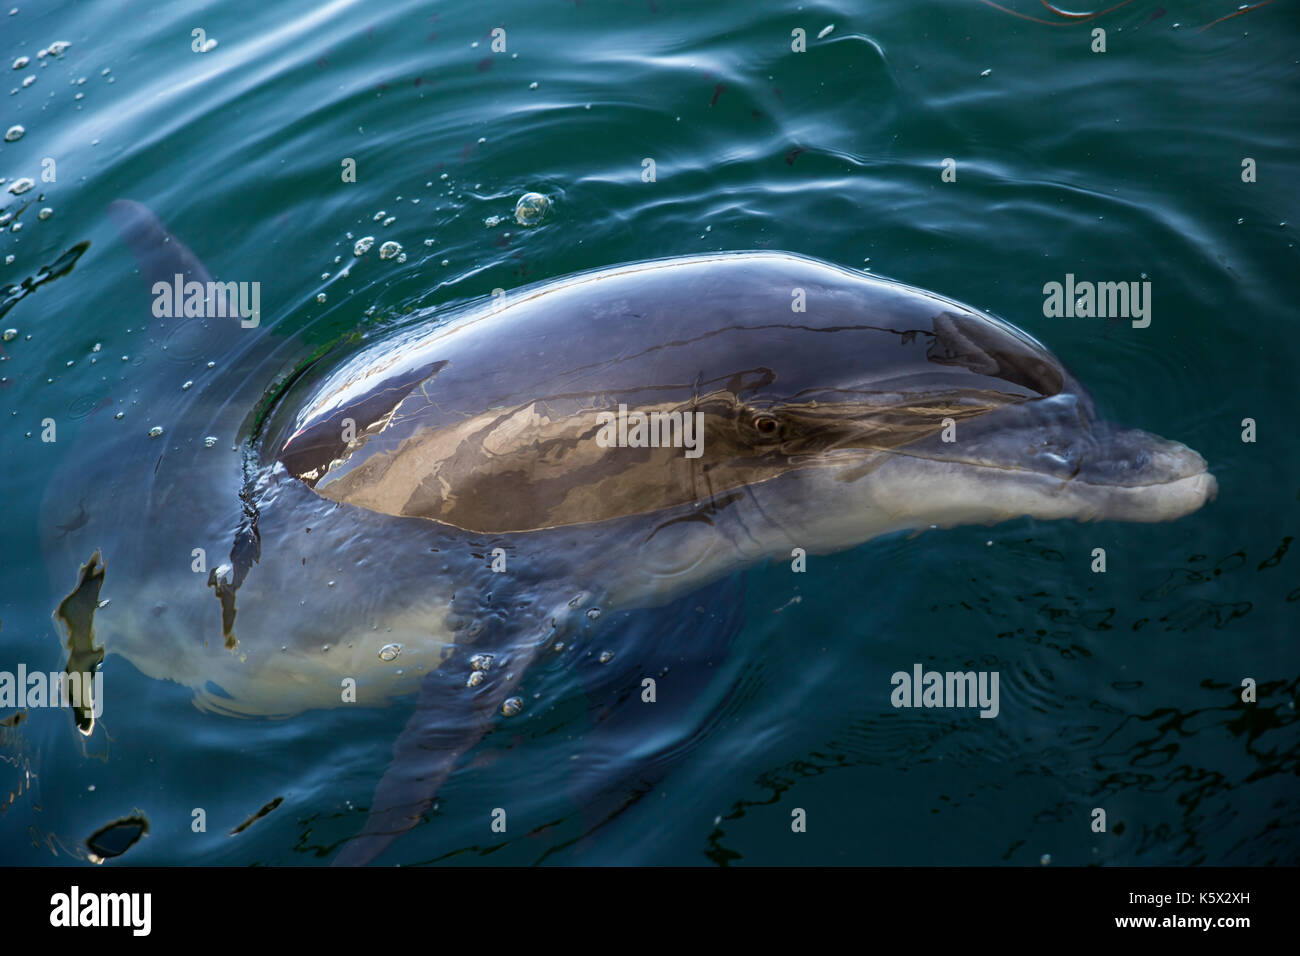 Bottle Nosed Dolphin having a look Stock Photo